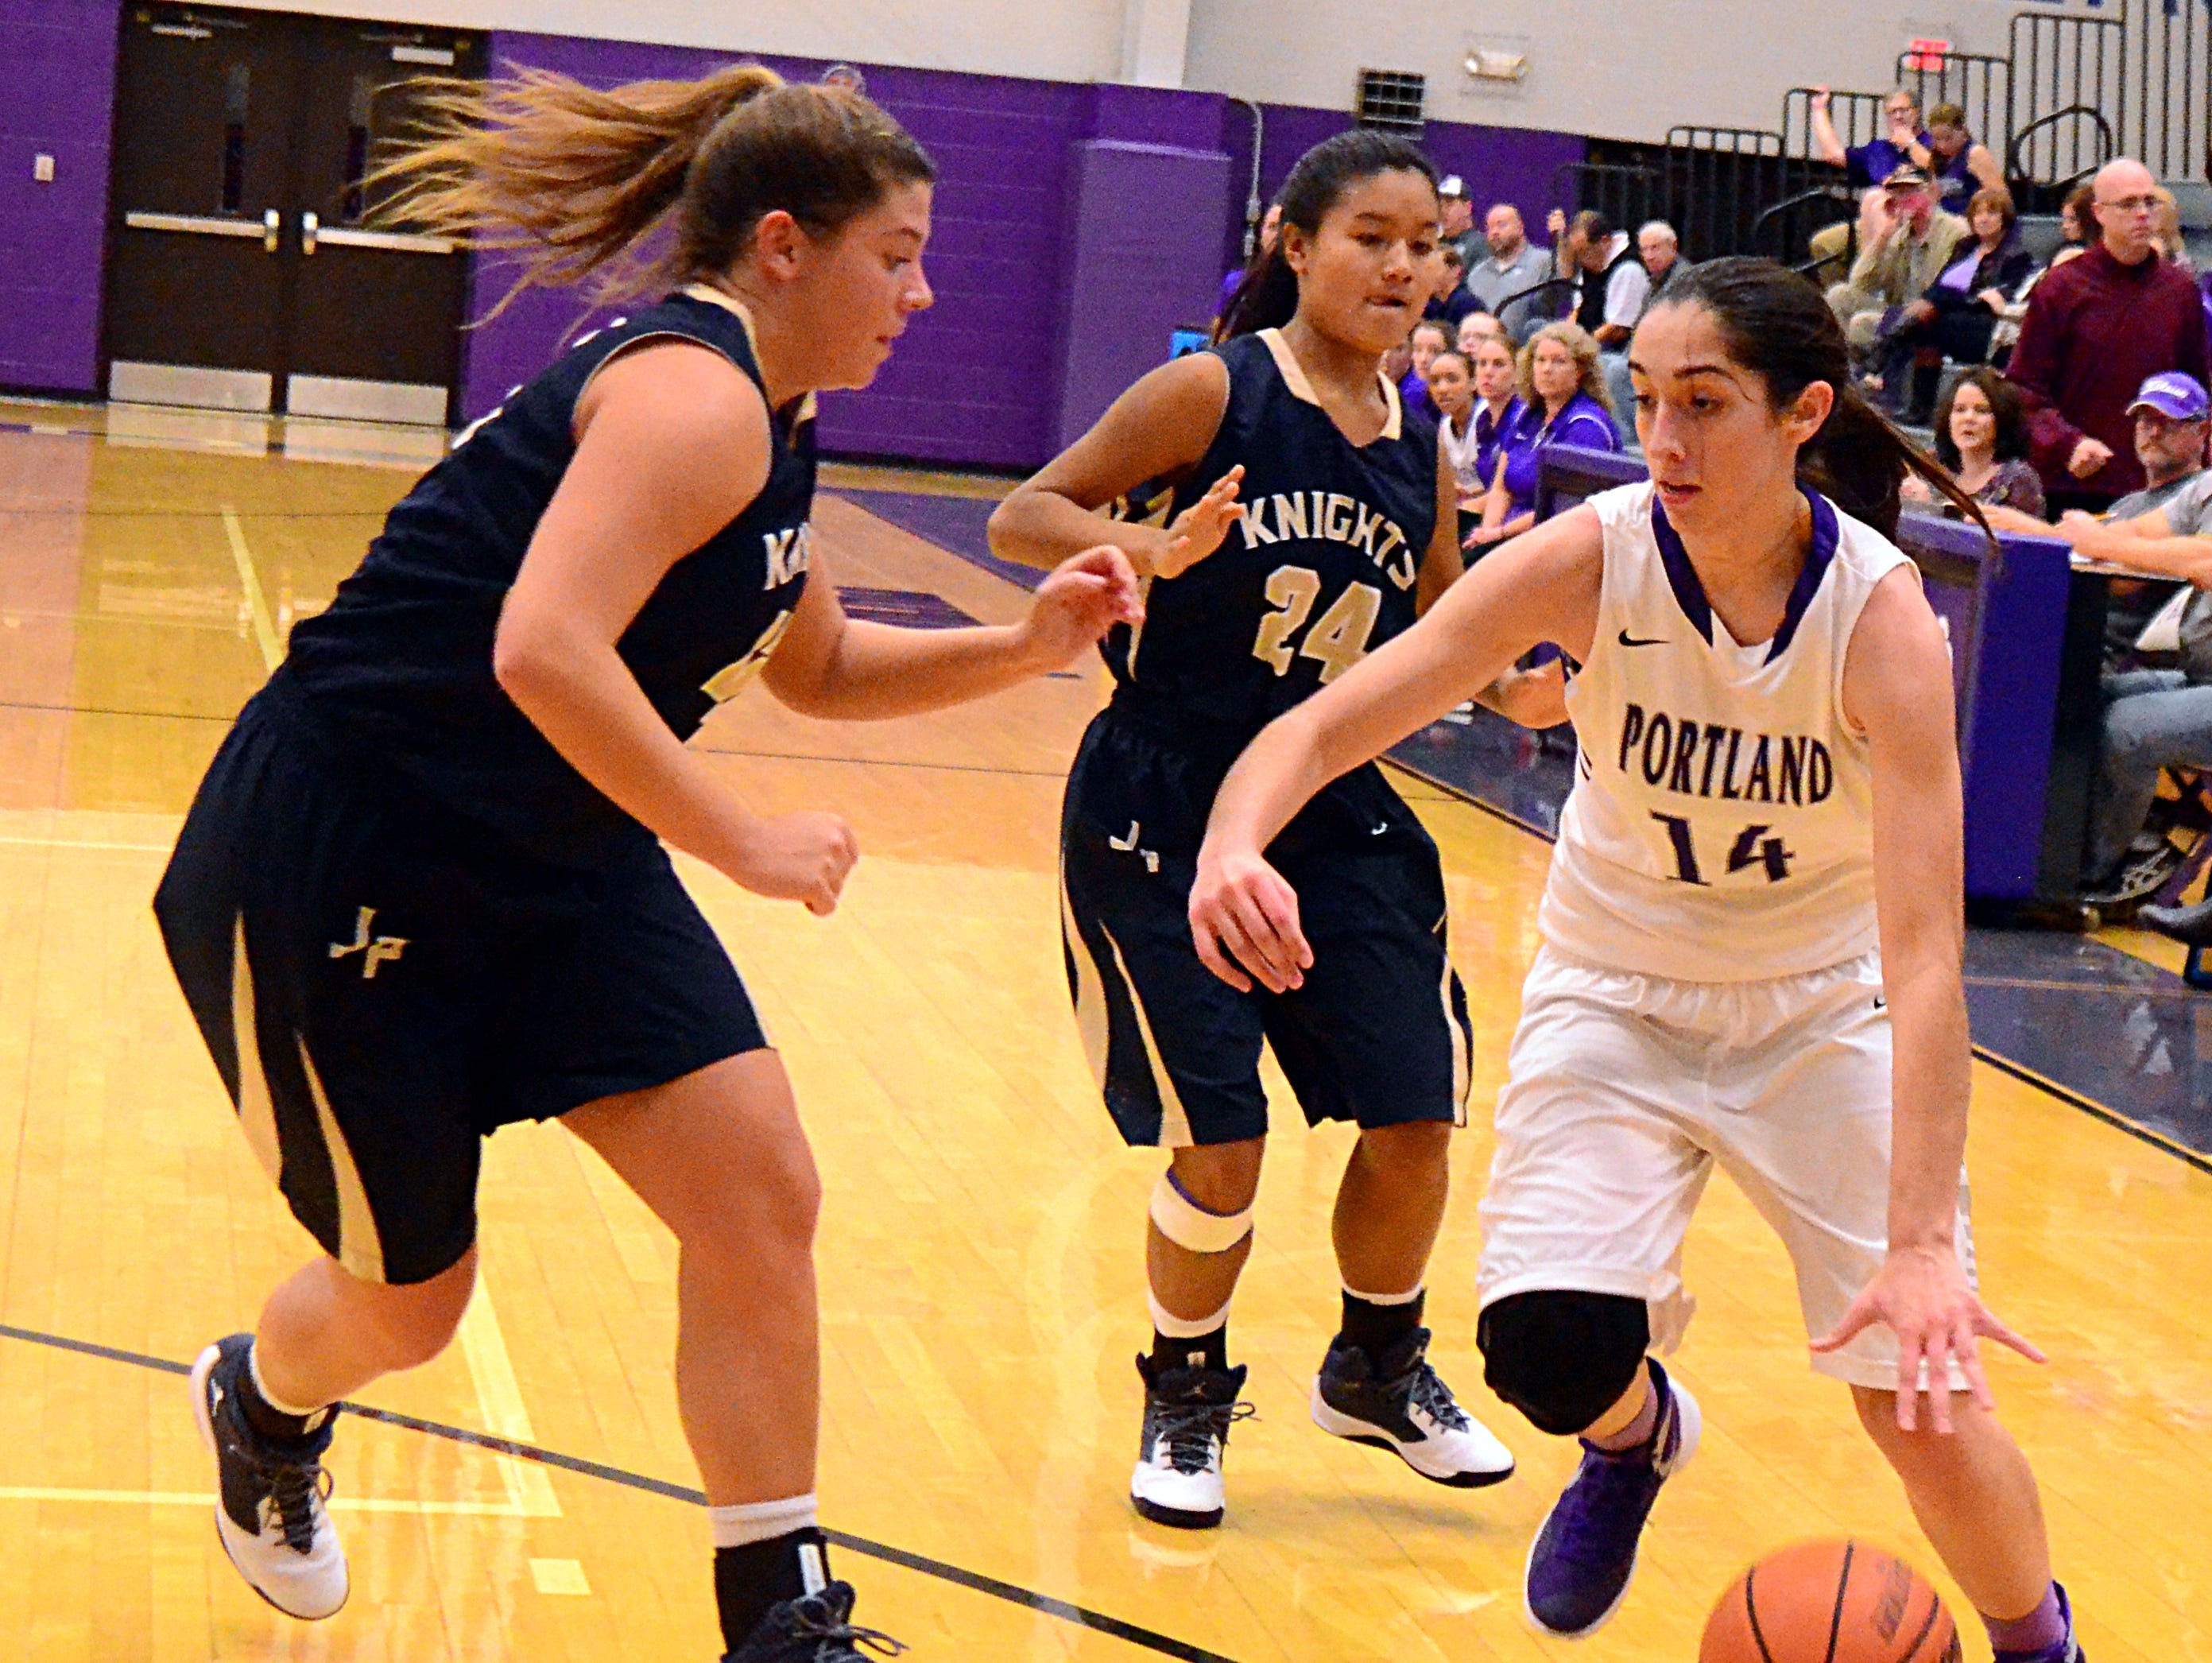 Portland High junior Mackenzie Trouten (14) dribbles to the basket as Pope John Paul II seniors Windee Johnson and Mercedes Smith (24) converge during first-quarter action. Trouten scored a career-high 17 points in the Lady Panthers' 52-37 victory on Tuesday evening.